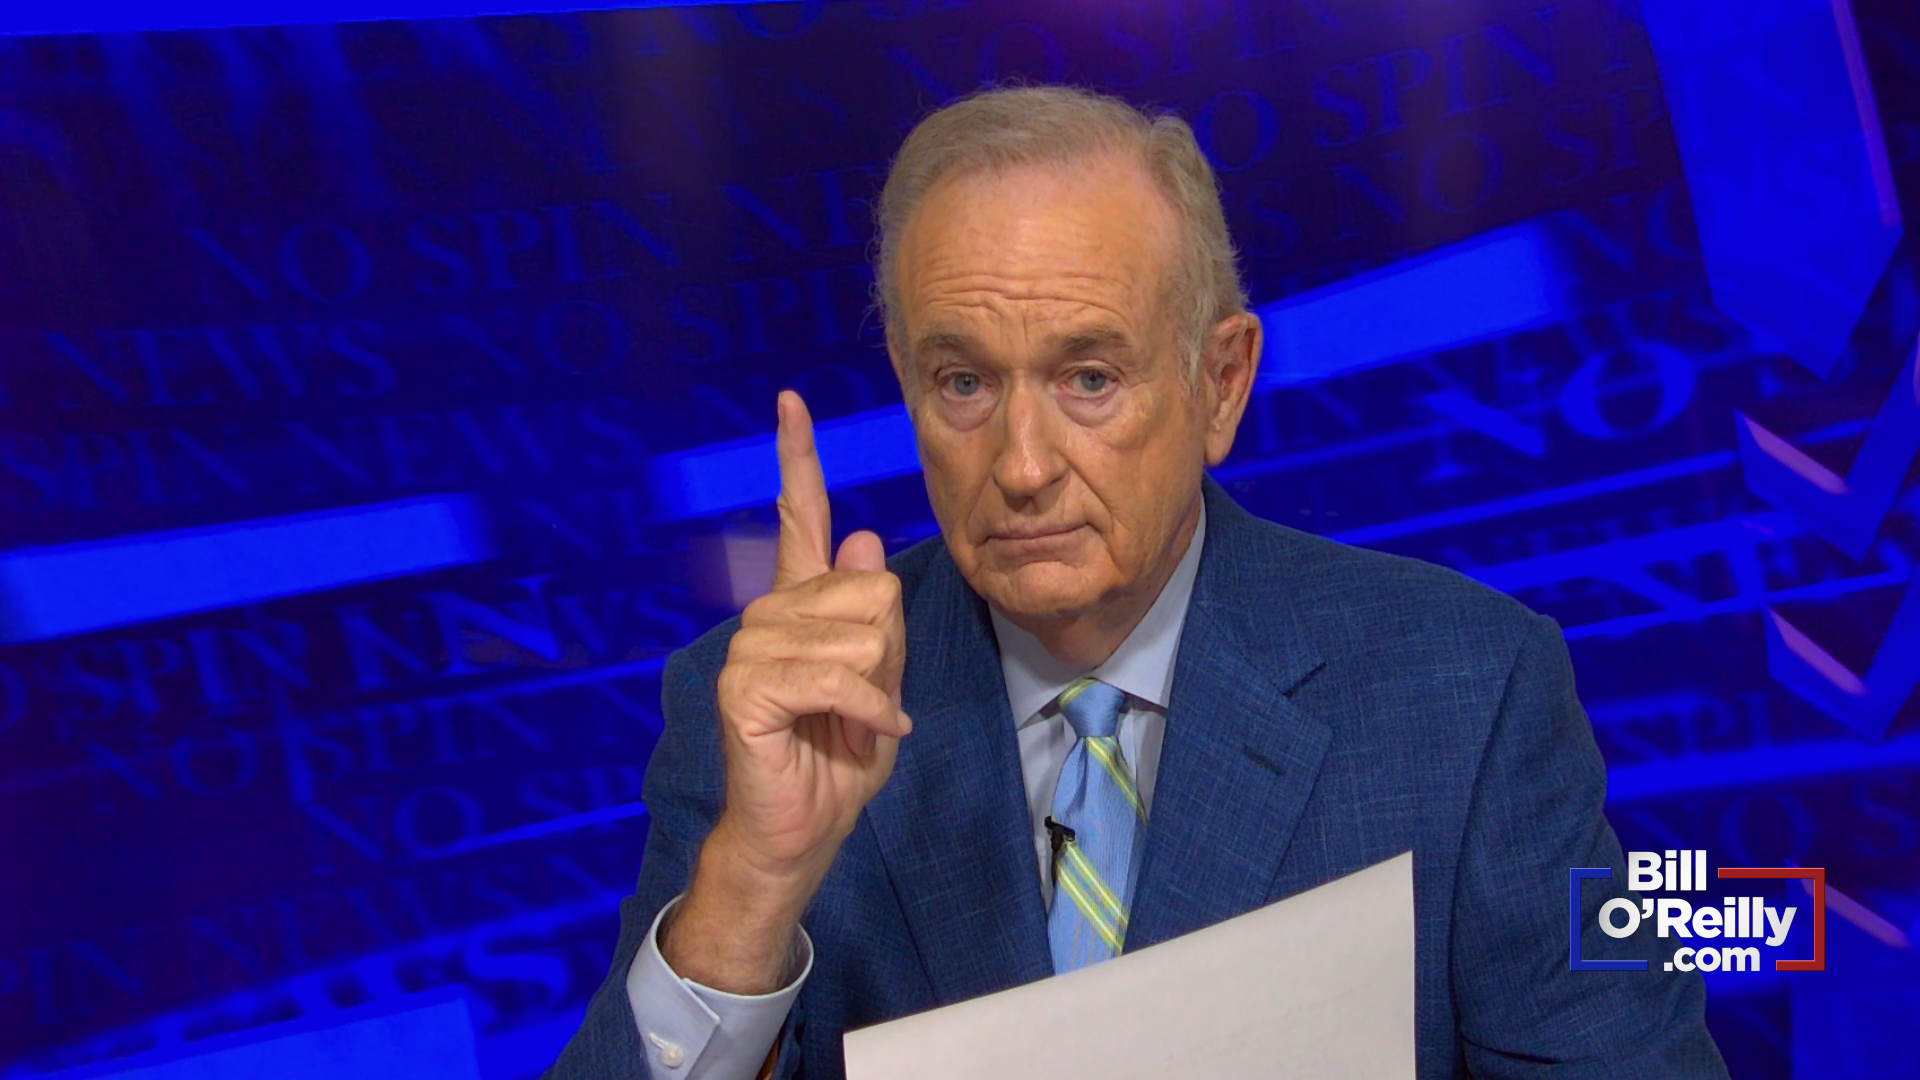 O'Reilly: Biden the Most Liberal President Ever